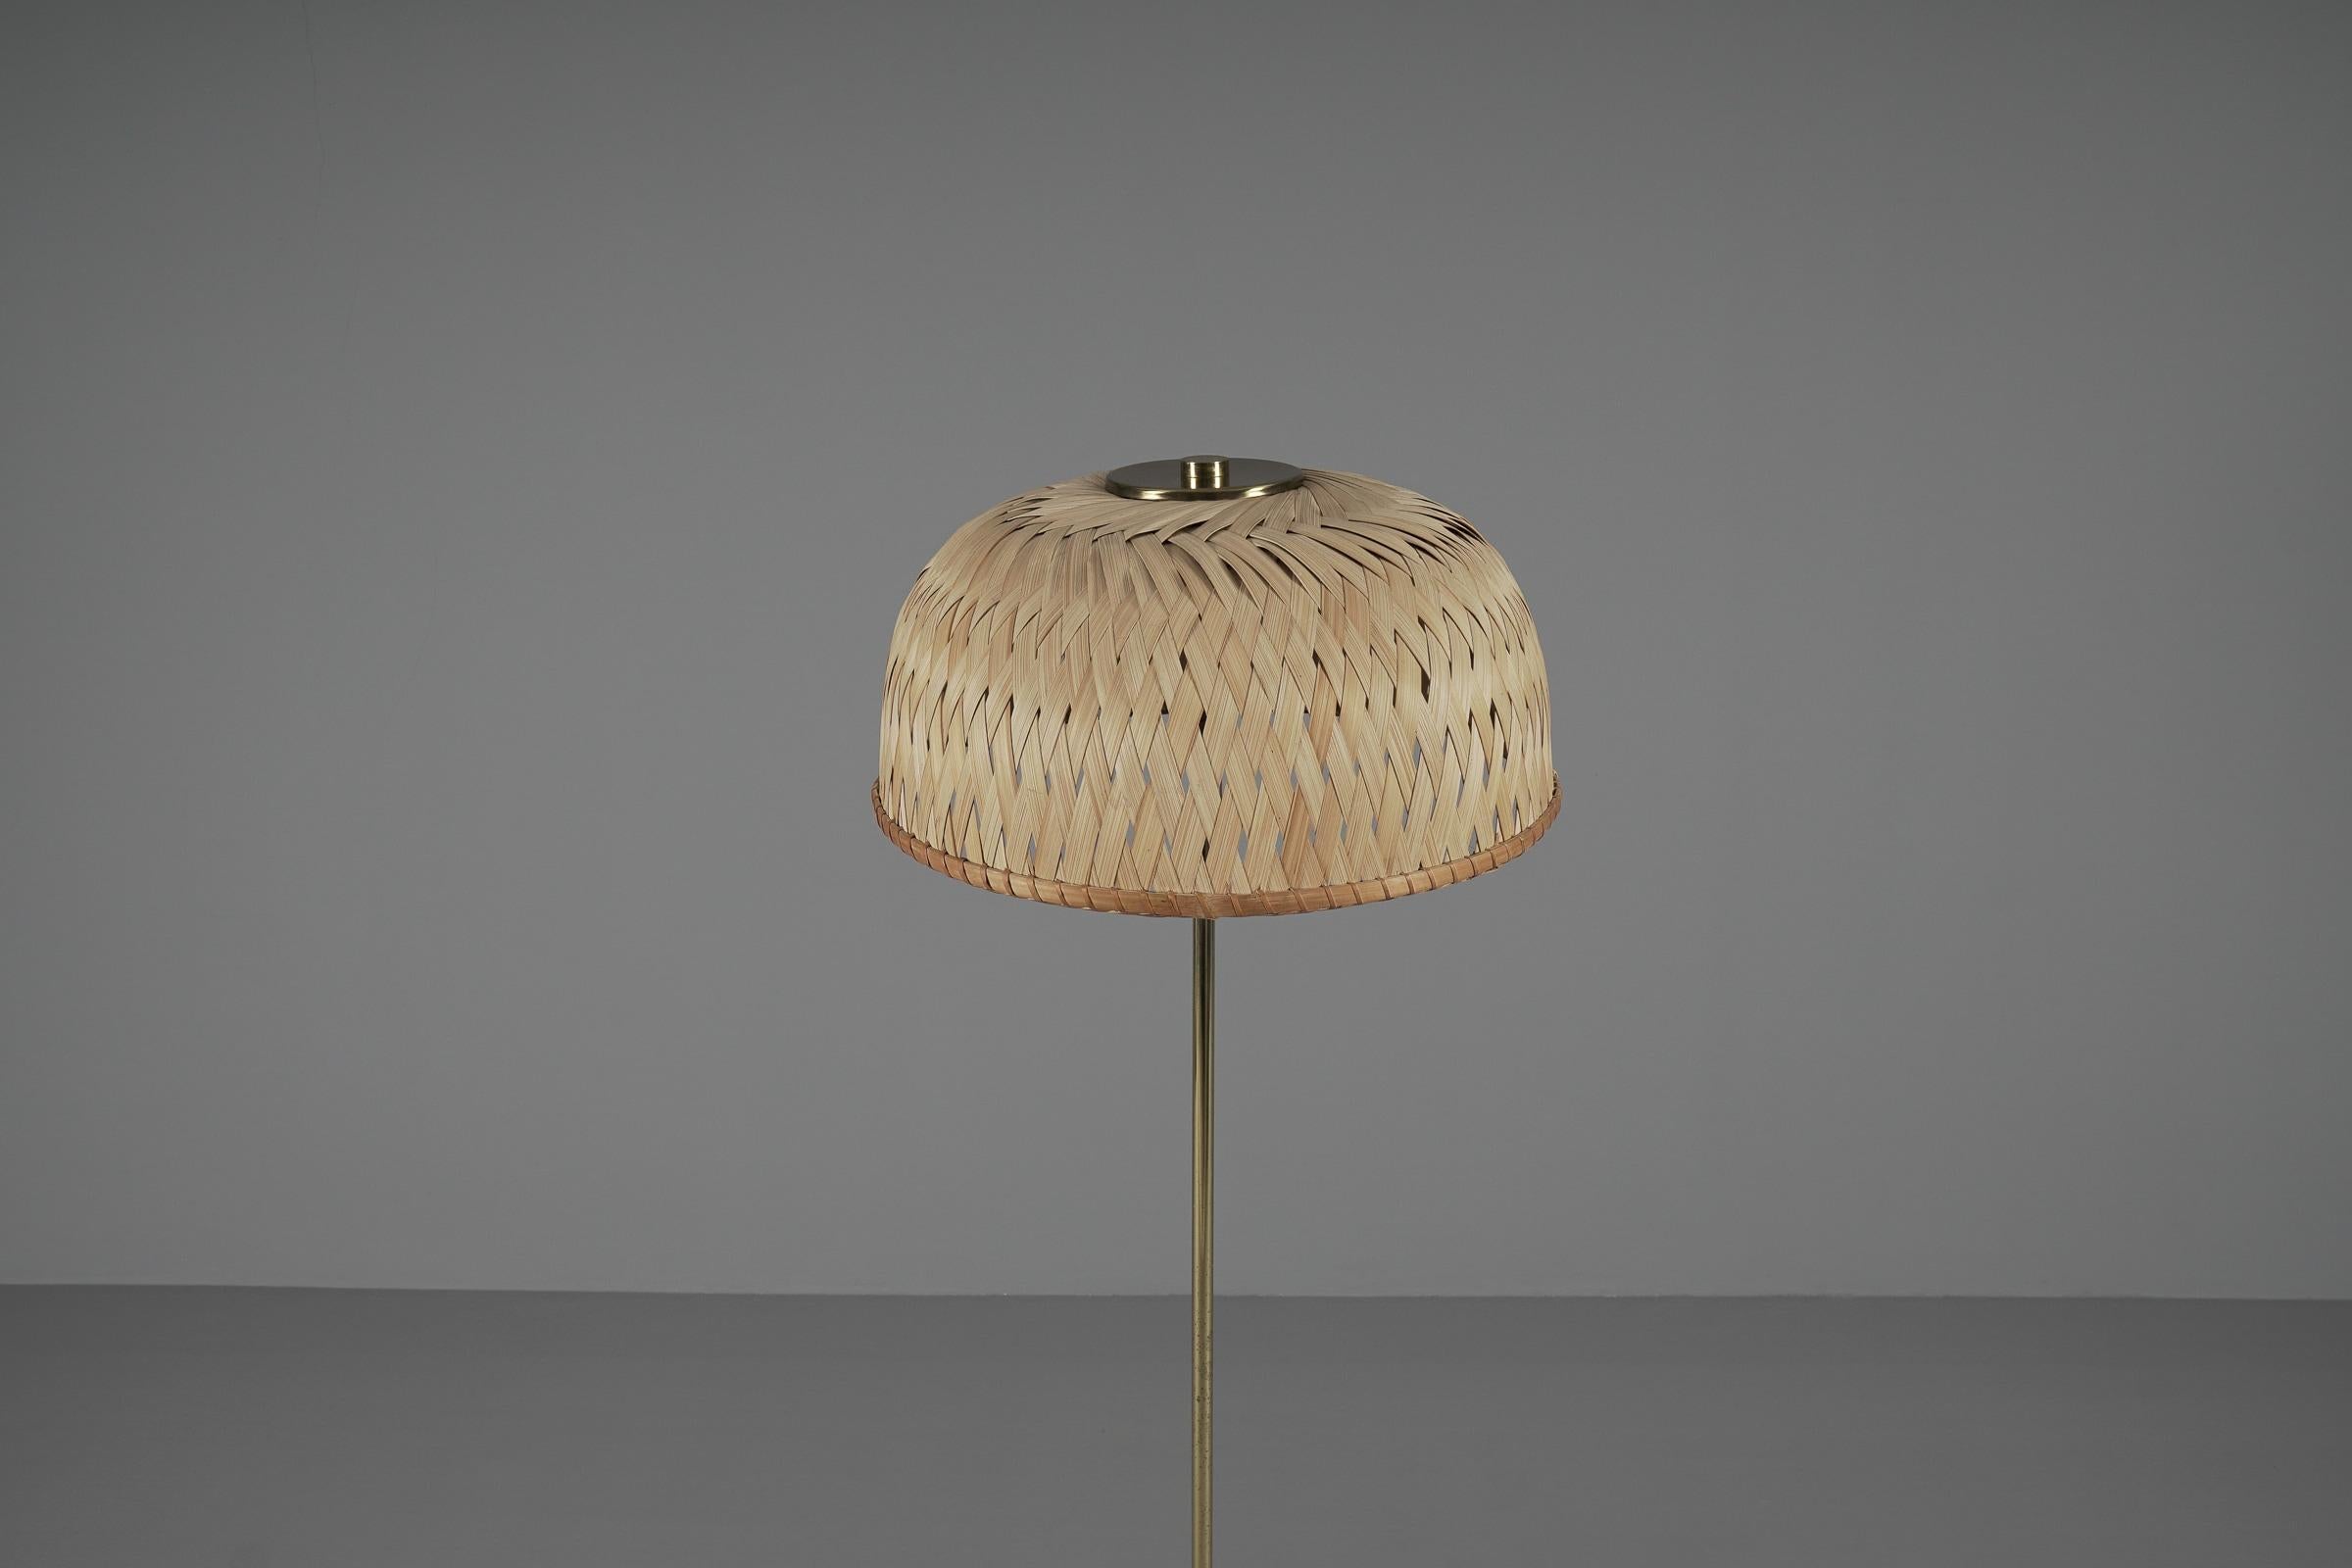 Tripod Floor Lamp in Brass and Wicker Shade, 1950s Italy For Sale 1